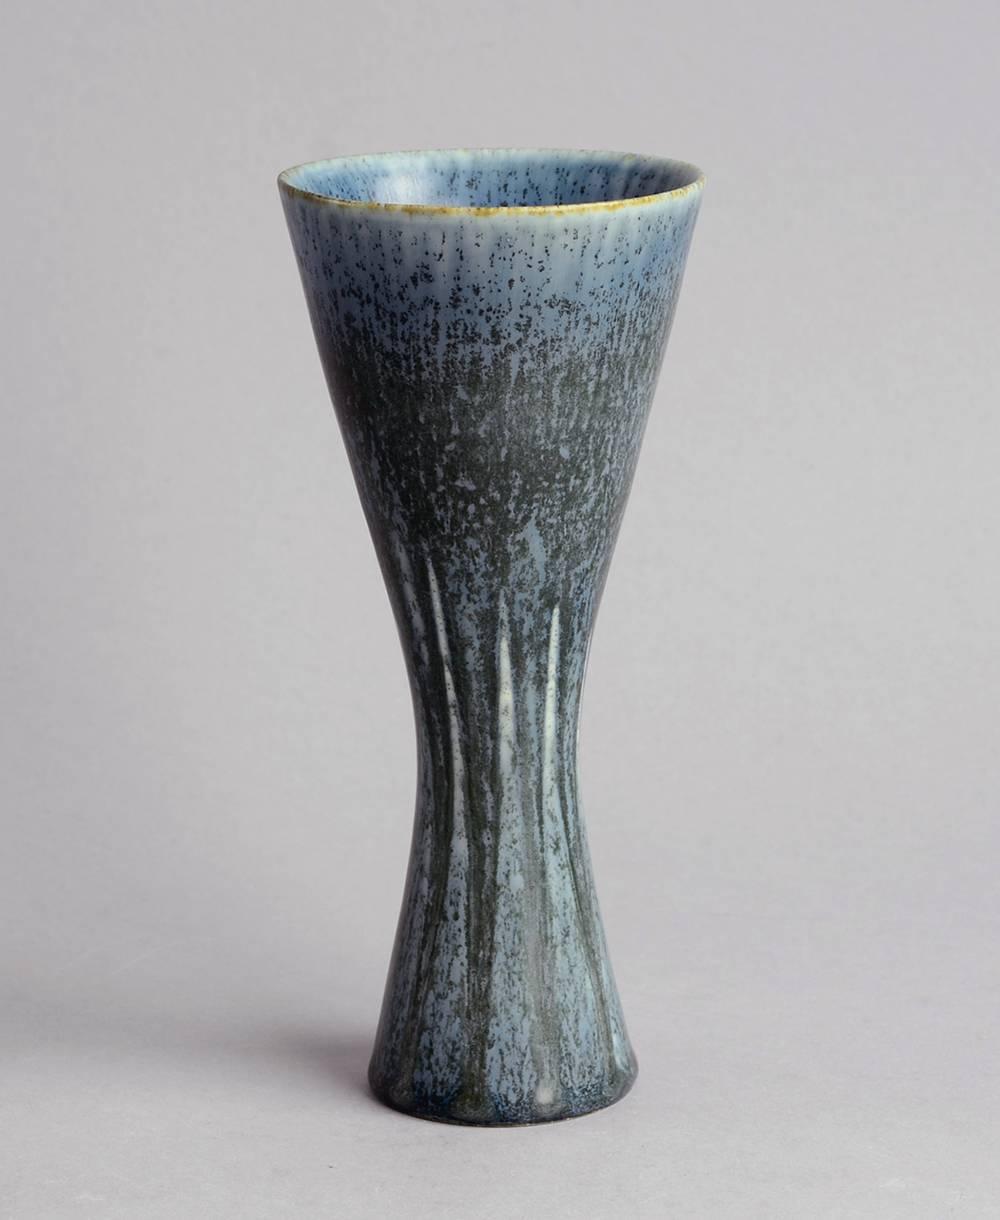 Carl Harry Stalhane for Rorstrand 

1.Stoneware vase with matte blue crystalline glaze.
Measures: Height 7 1/4